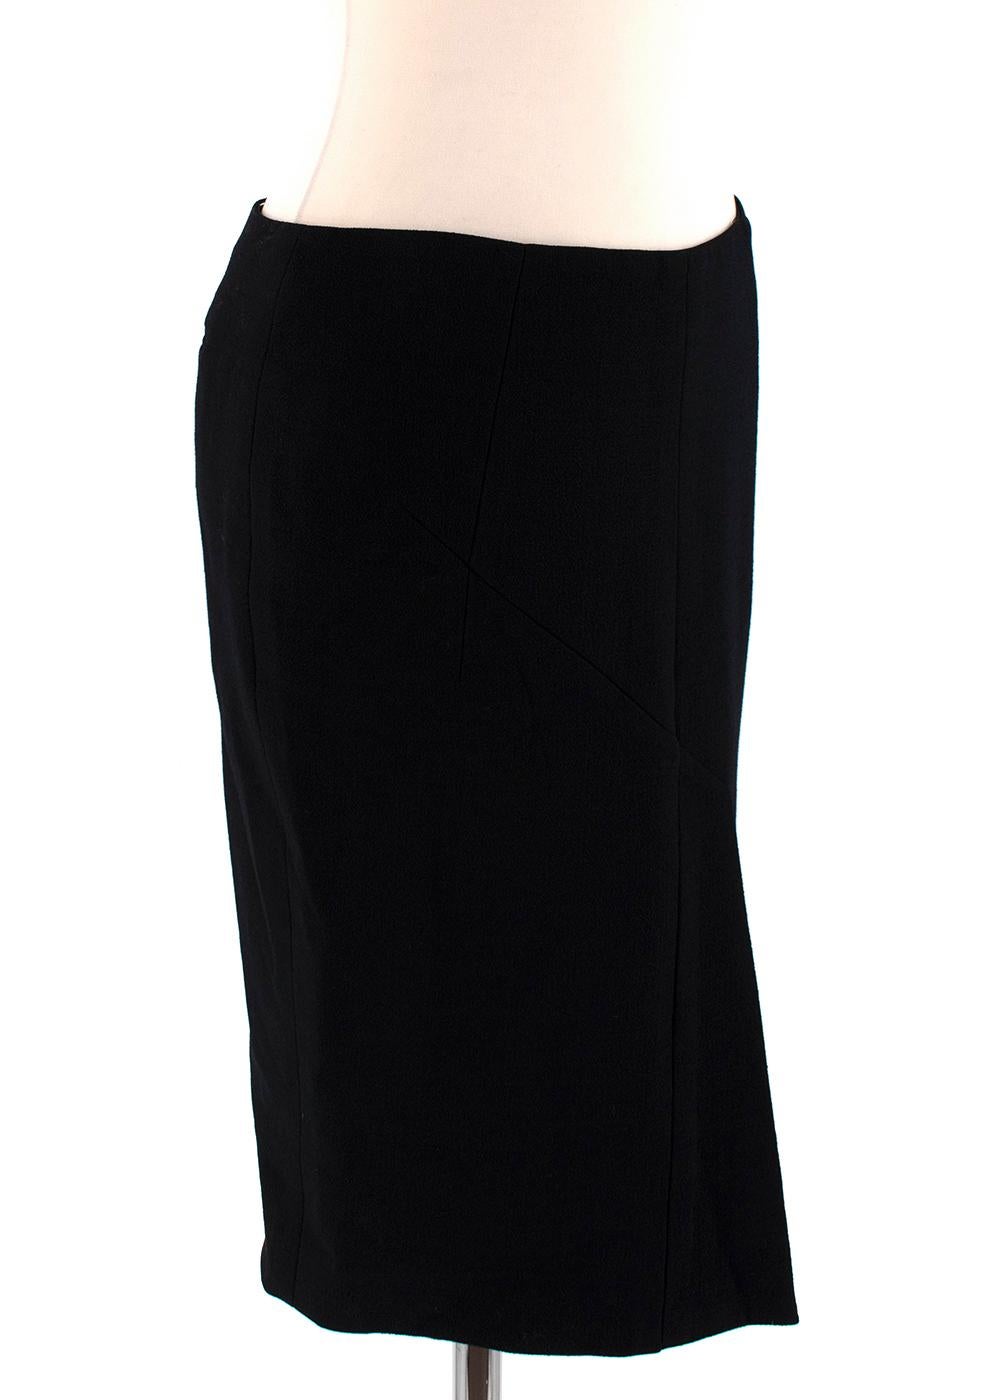 Tom Ford Black Wool Pencil Skirt

- Shiny silk inner lining
- Back zip fastening
- Two back slit pockets
- Front panel slit
- Darts to accentuate the waist 
- Just below the knee length
- Textured material
- Warm blend of wool

Fabric